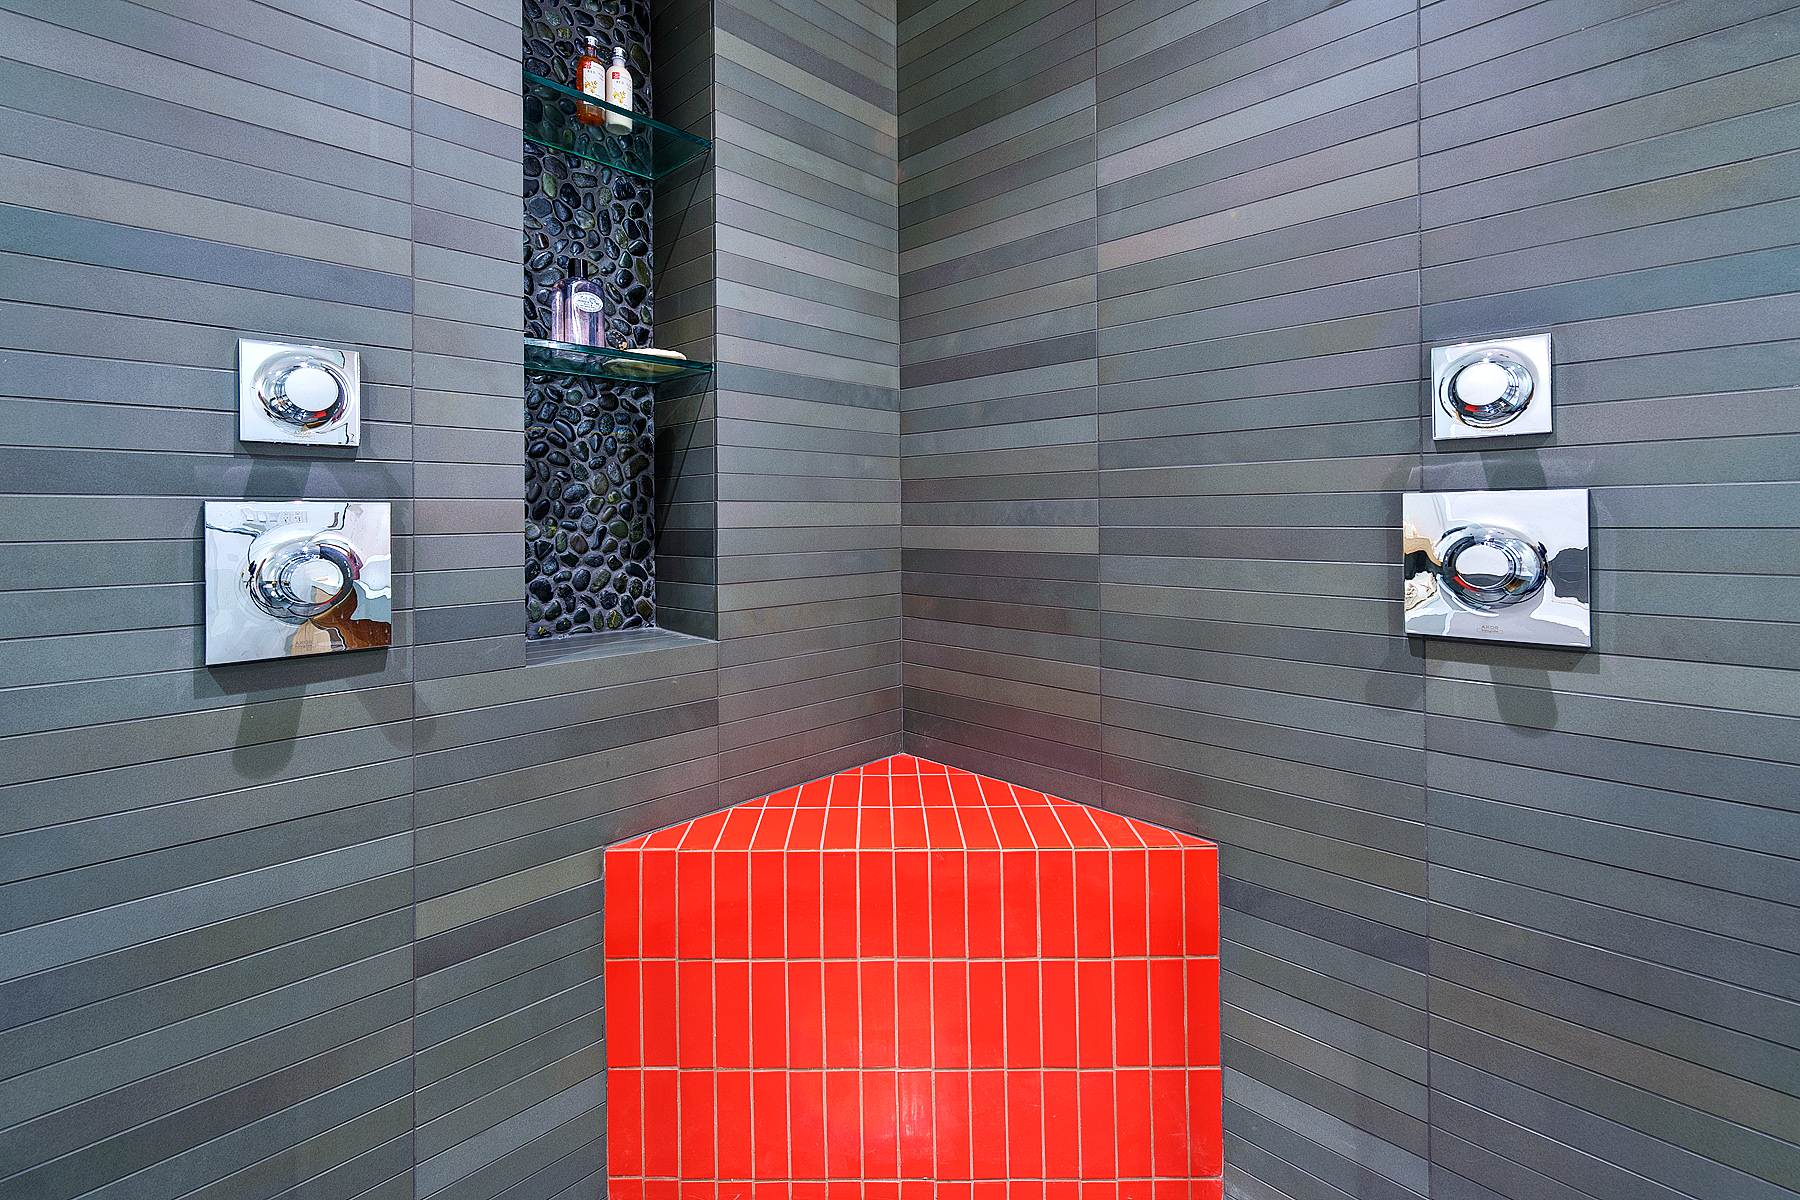 https://st.hzcdn.com/simgs/pictures/bathrooms/red-bench-and-pebble-niche-michael-tauber-architecture-img~94b19bb20d77e683_14-4971-1-cb839a6.jpg